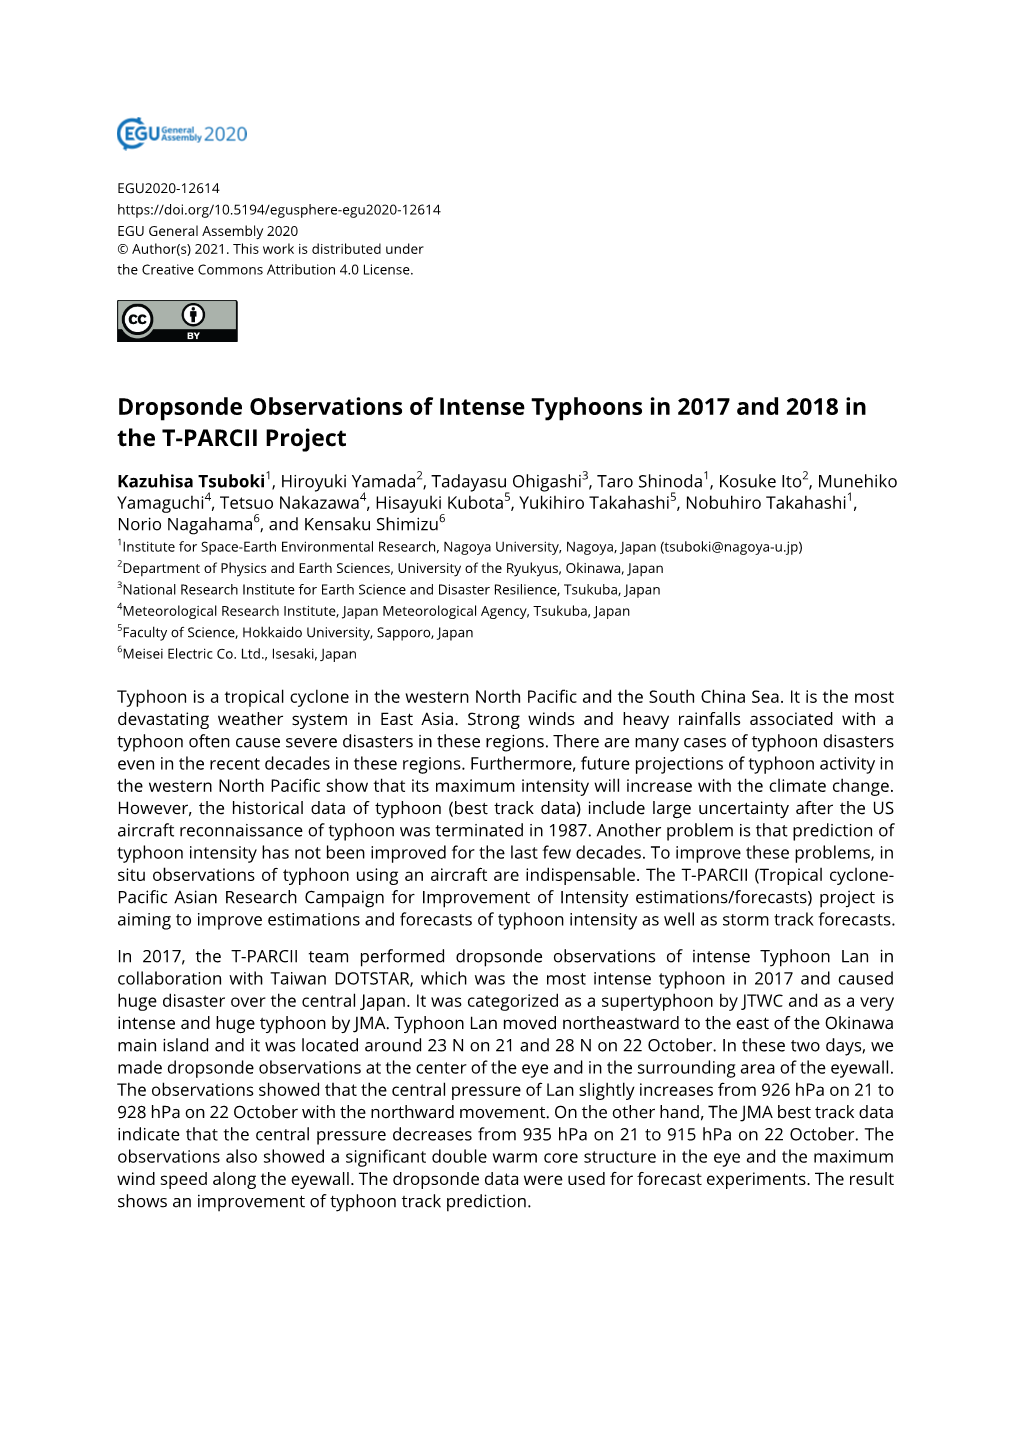 Dropsonde Observations of Intense Typhoons in 2017 and 2018 in the T-PARCII Project